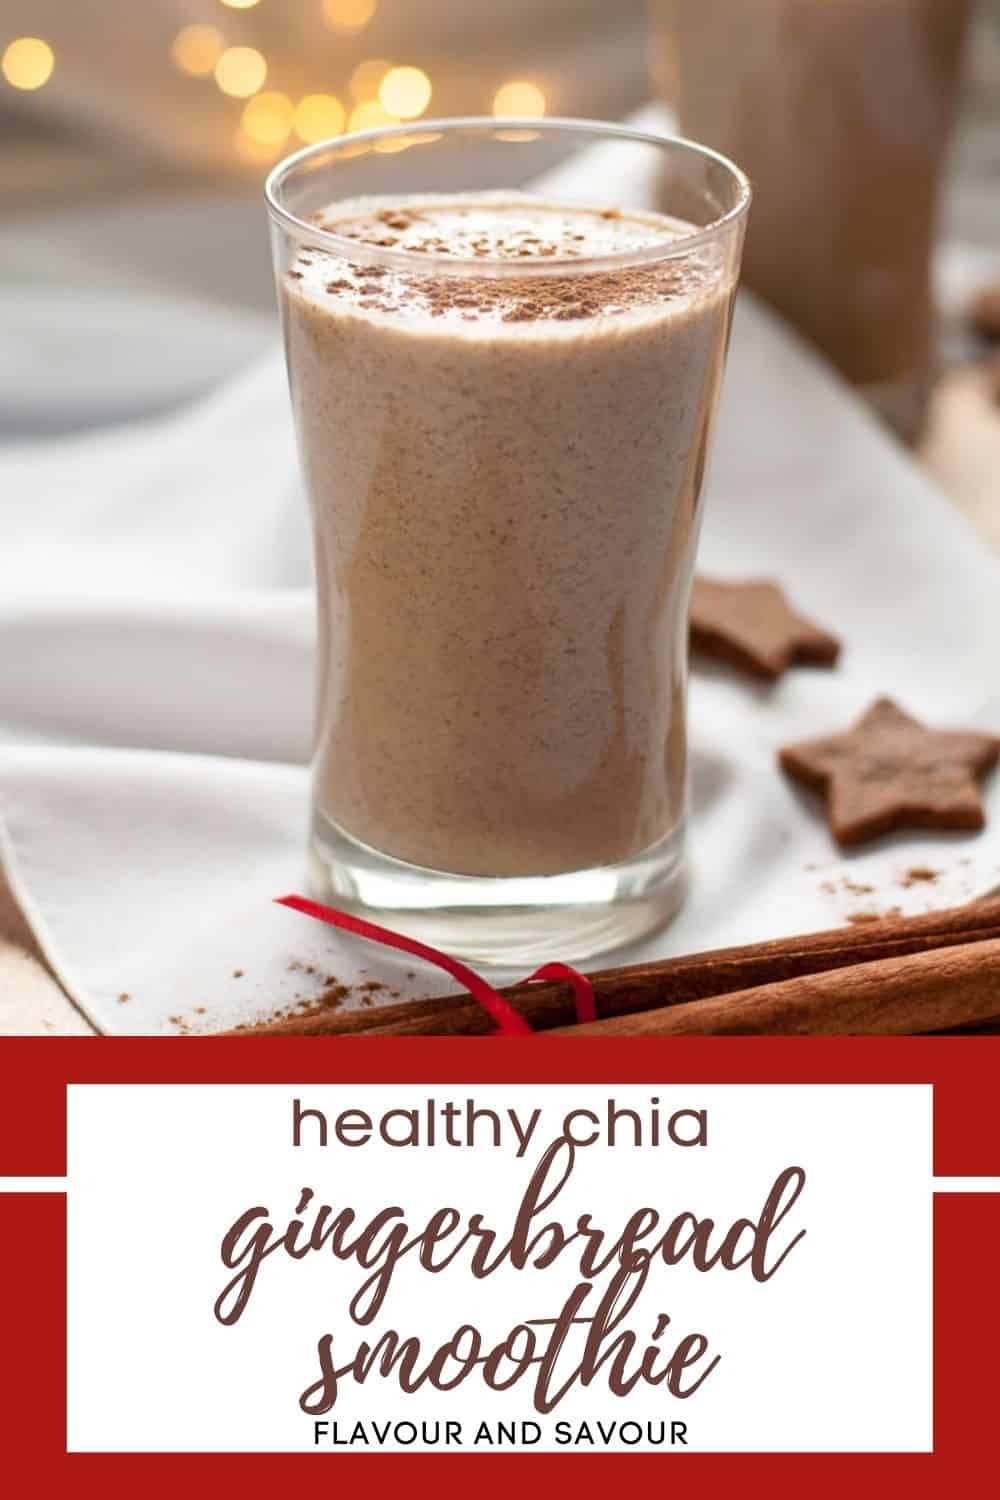 image with text overlay for healthy chia gingerbread smoothie